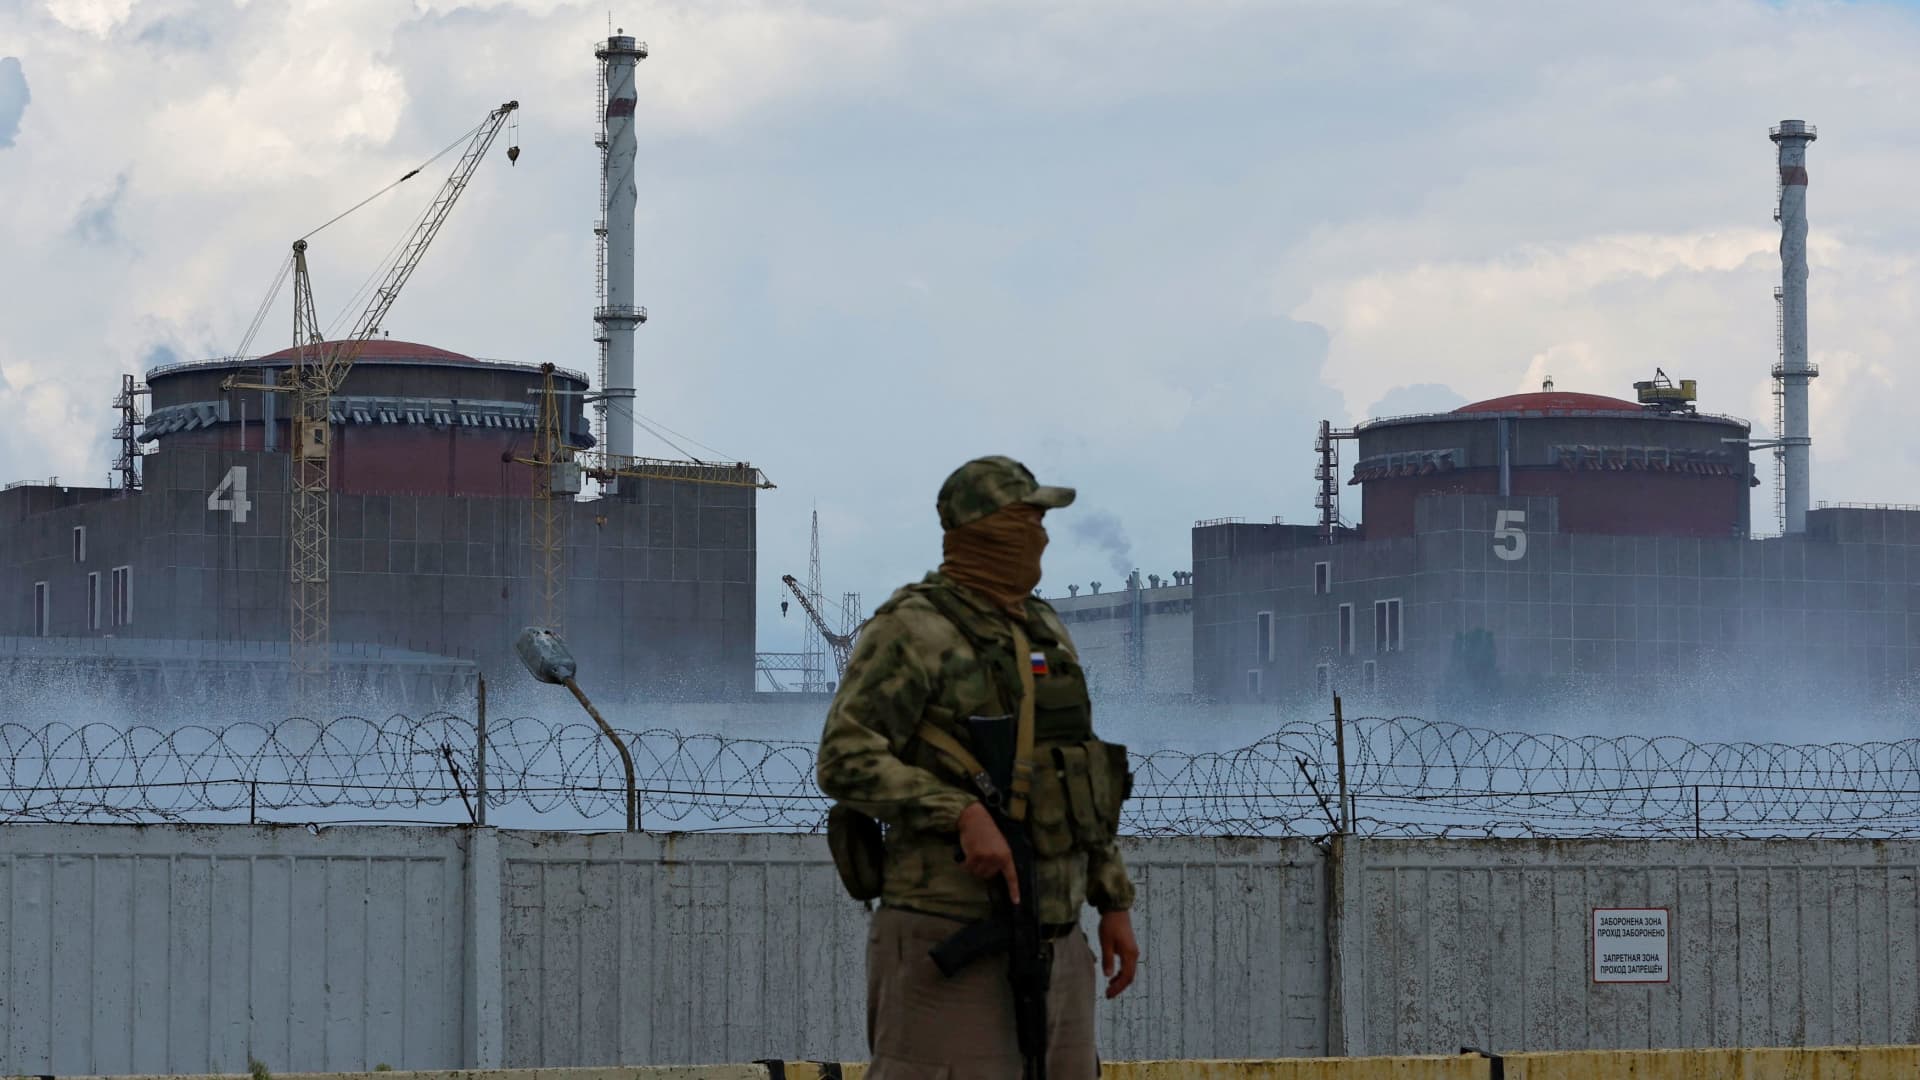 A serviceman with a Russian flag on his uniform stands guard near the Zaporizhzhia Nuclear Power Plant in the course of Ukraine-Russia conflict outside the Russian-controlled city of Enerhodar in the Zaporizhzhia region, Ukraine August 4, 2022.